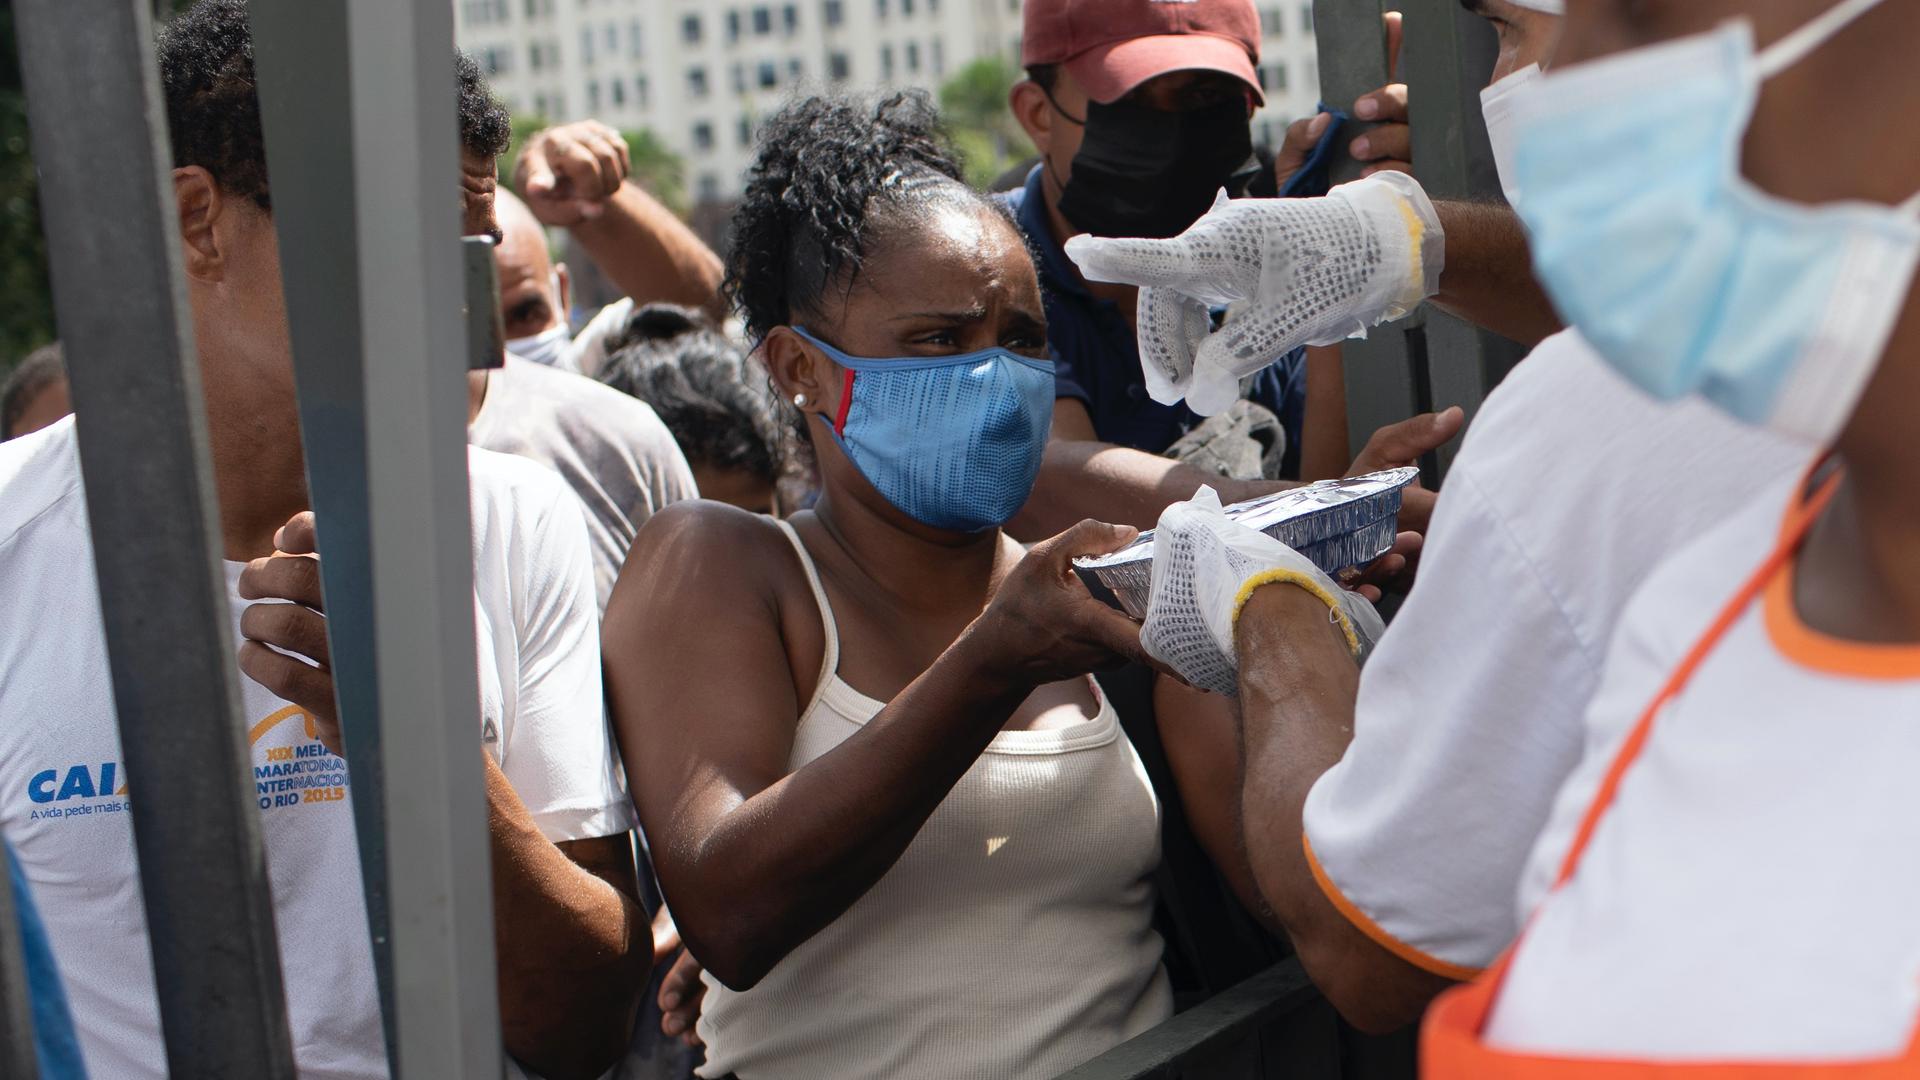 A woman receives a plate of food donated by the Leao Xlll Foundation amid the COVID-19 pandemic in Rio de Janeiro, Brazil, April 7, 2021.